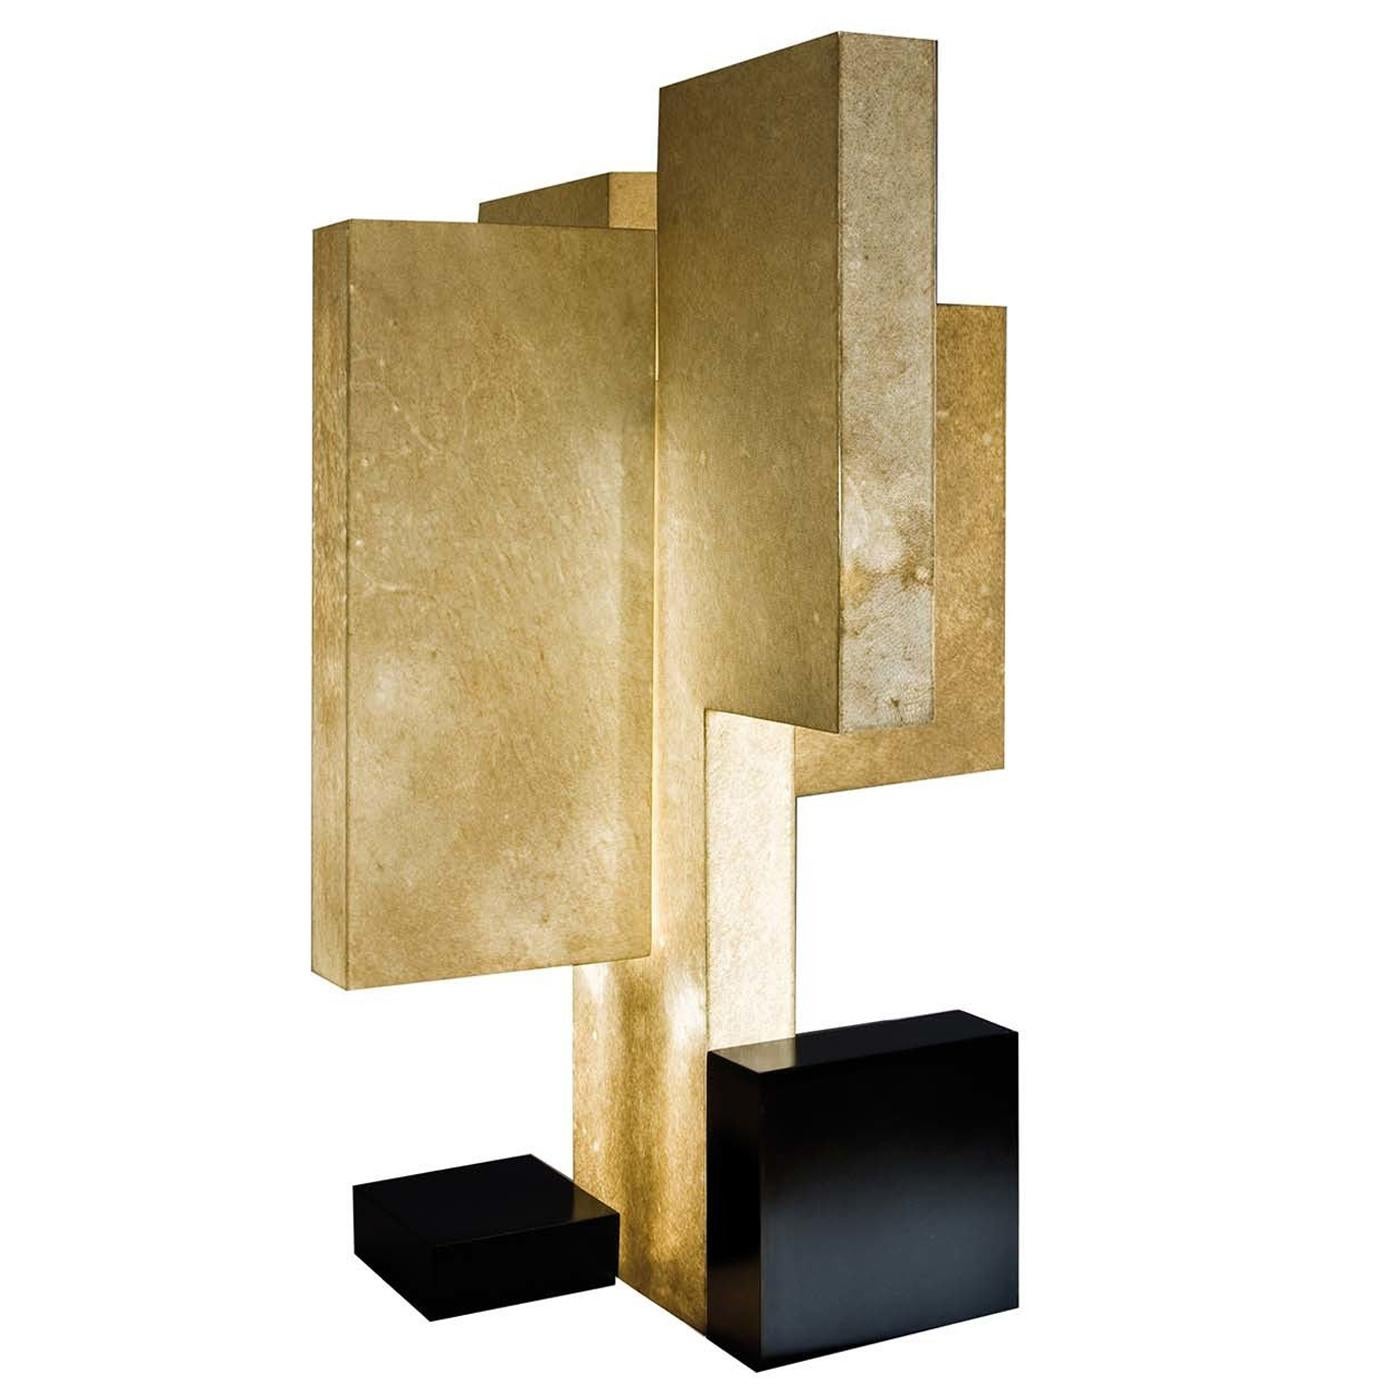 Laurameroni "Novecentotrenta" Modern Architectural Table Lamp in Parchment For Sale